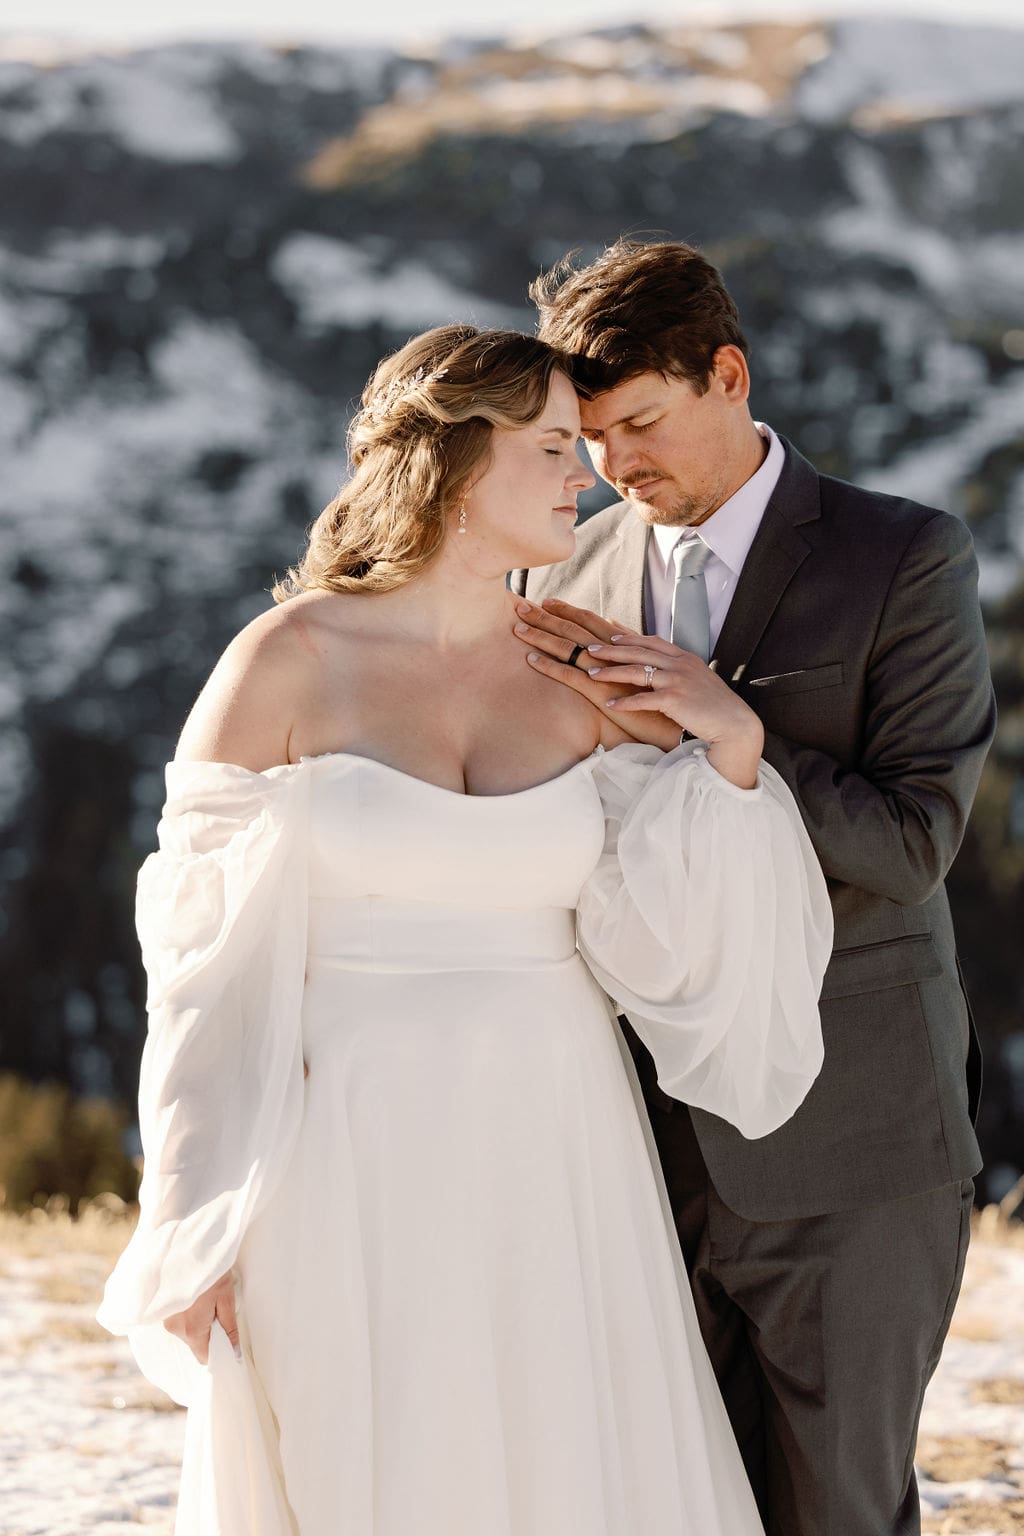 Romantic portraits of a bride and groom on loveland pass in colorado after eloping with close friends and family